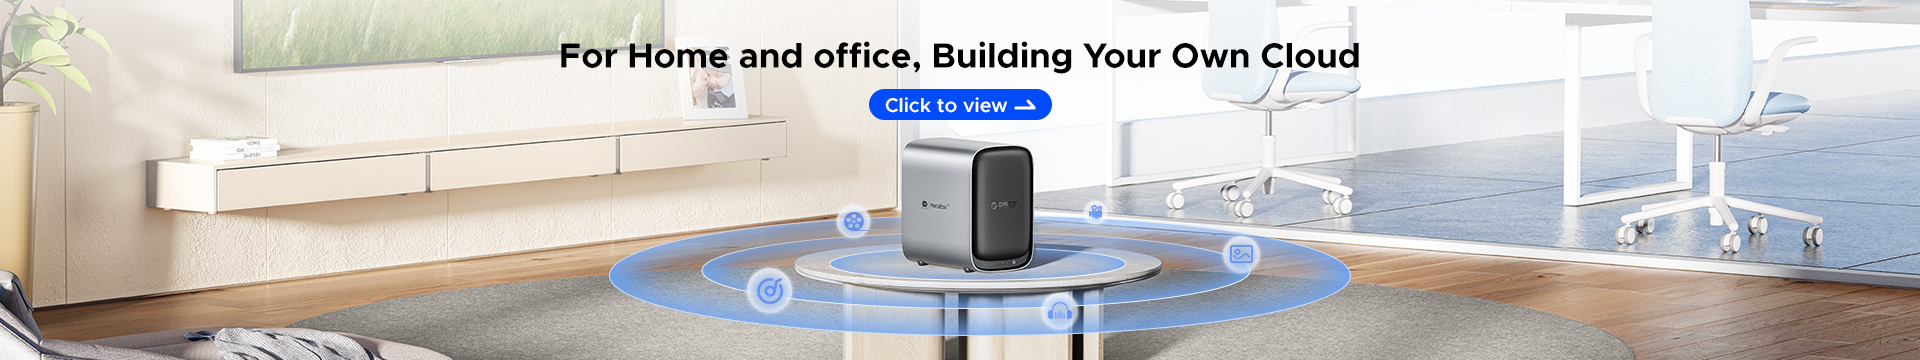 For Home and Office, Building Your Own Cloud